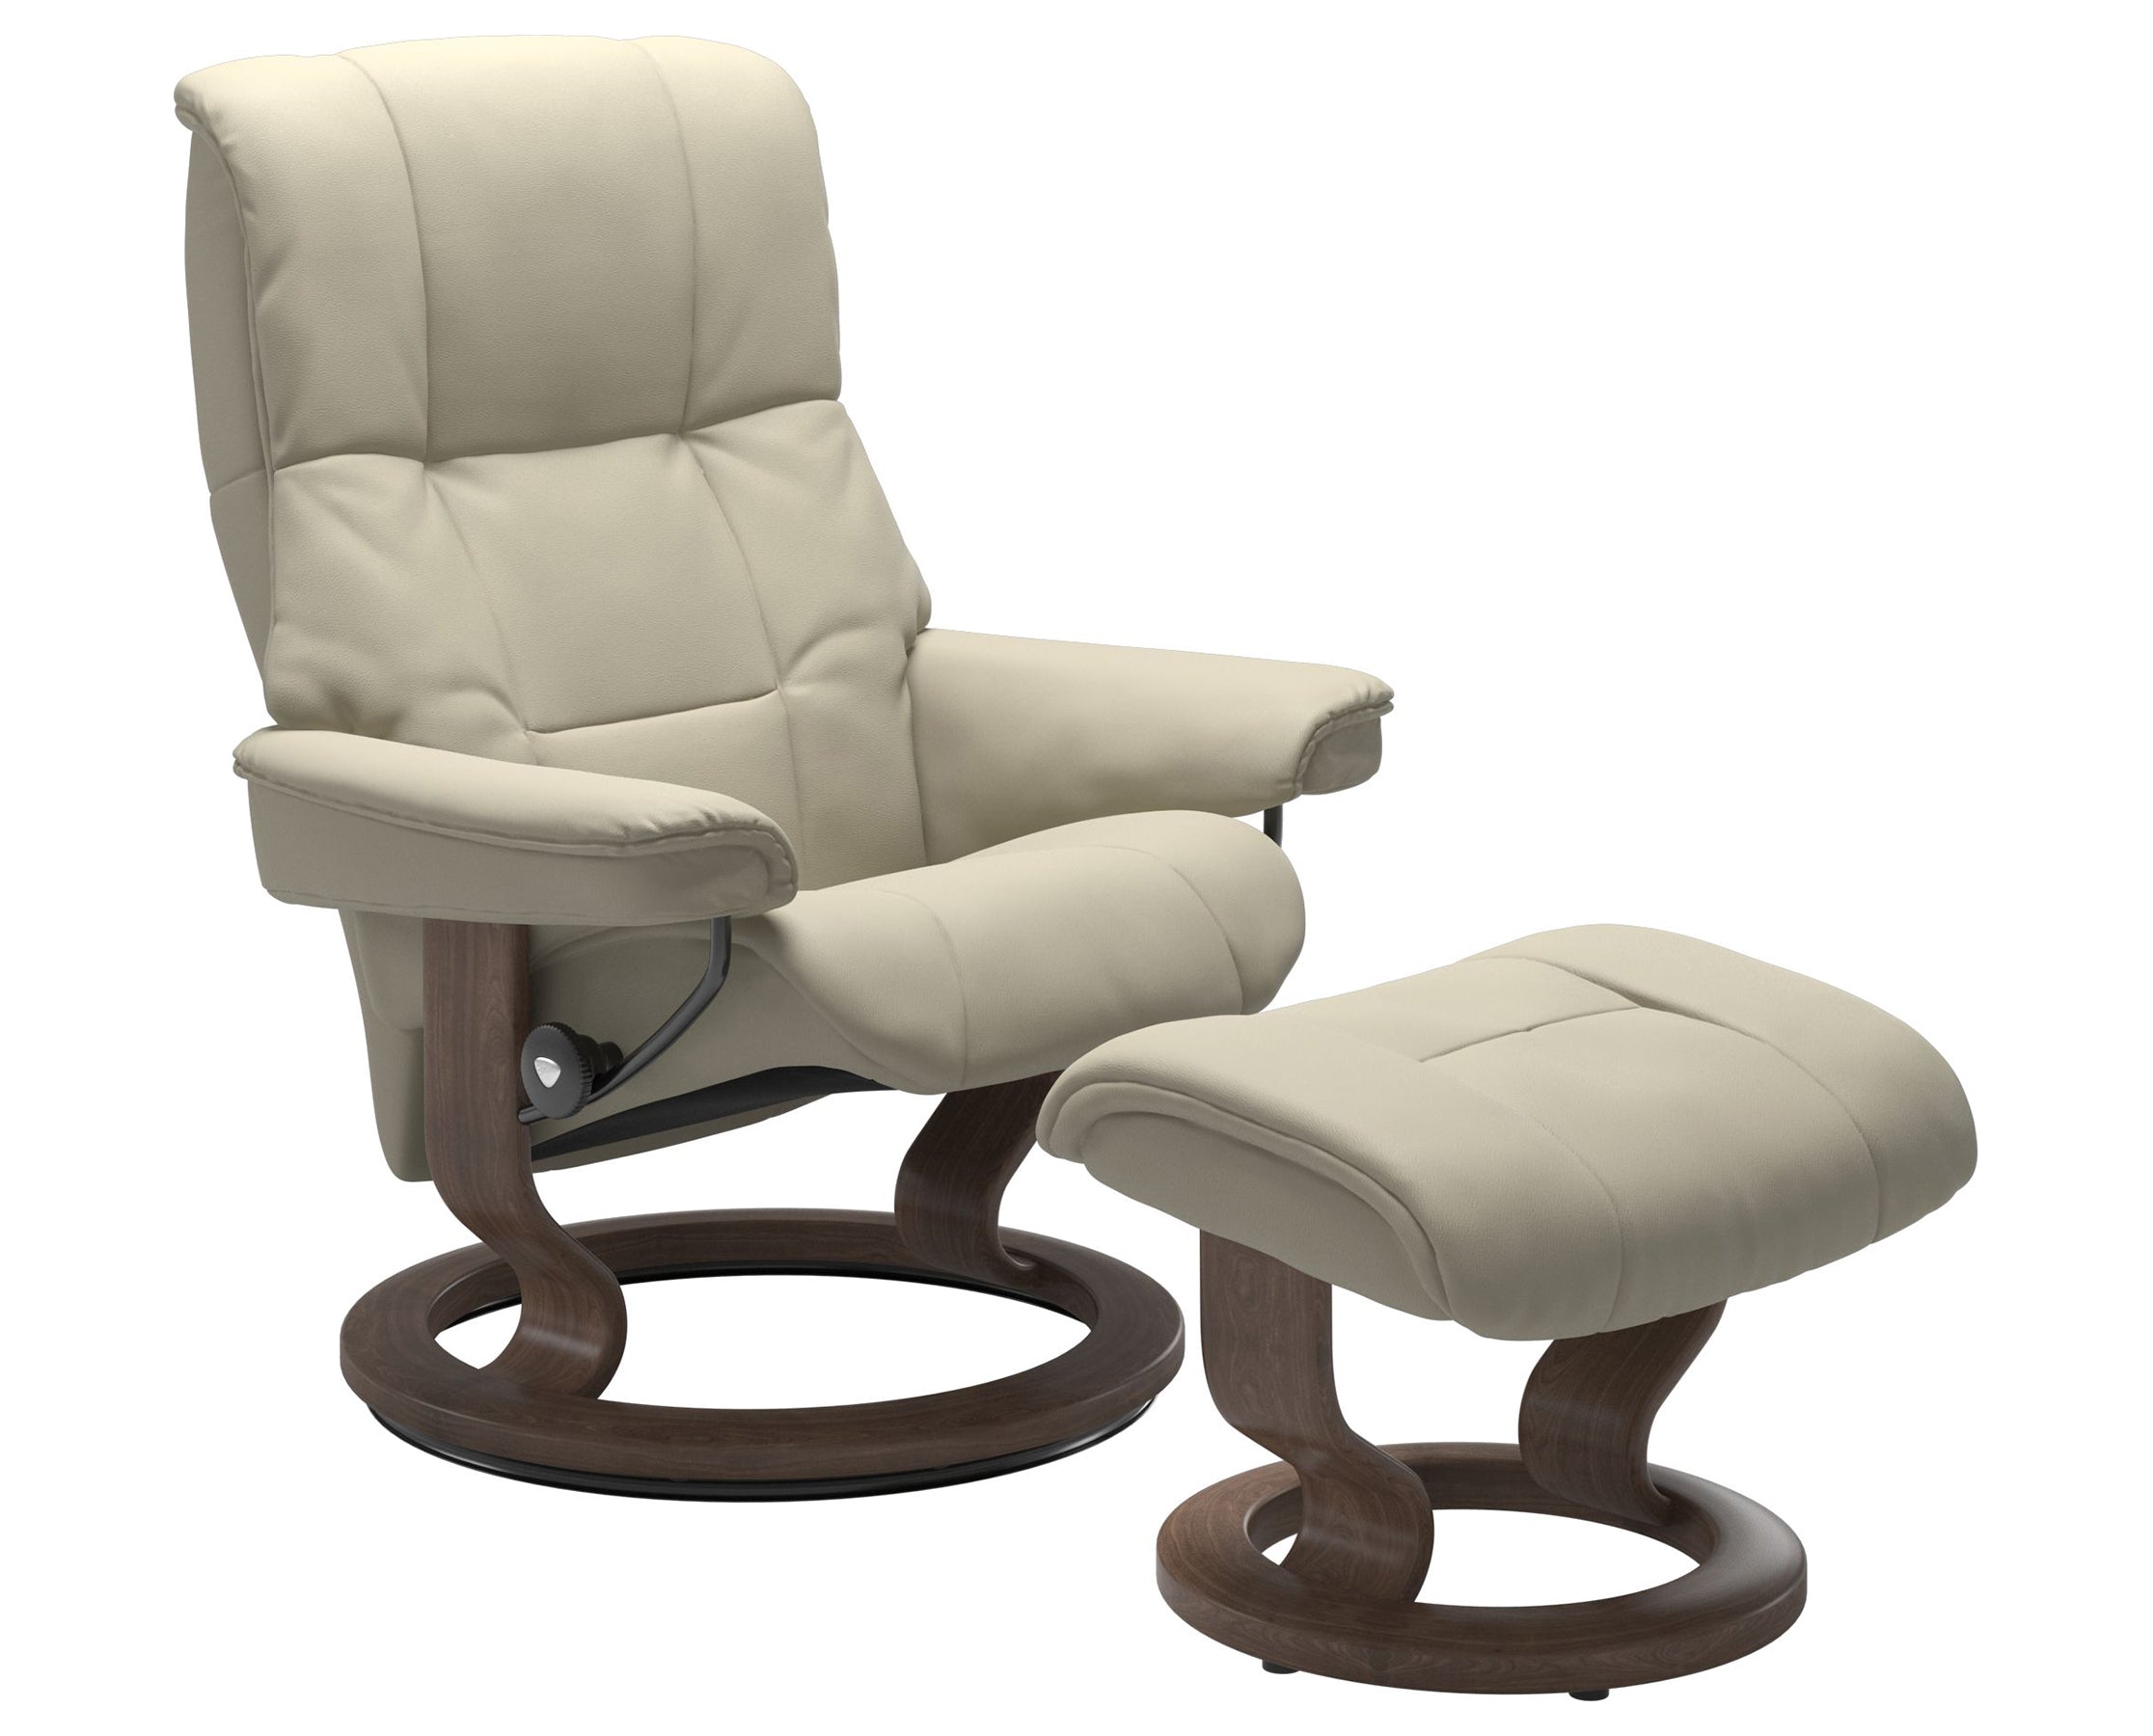 Paloma Leather Light Grey S/M/L and Walnut Base | Stressless Mayfair Classic Recliner | Valley Ridge Furniture